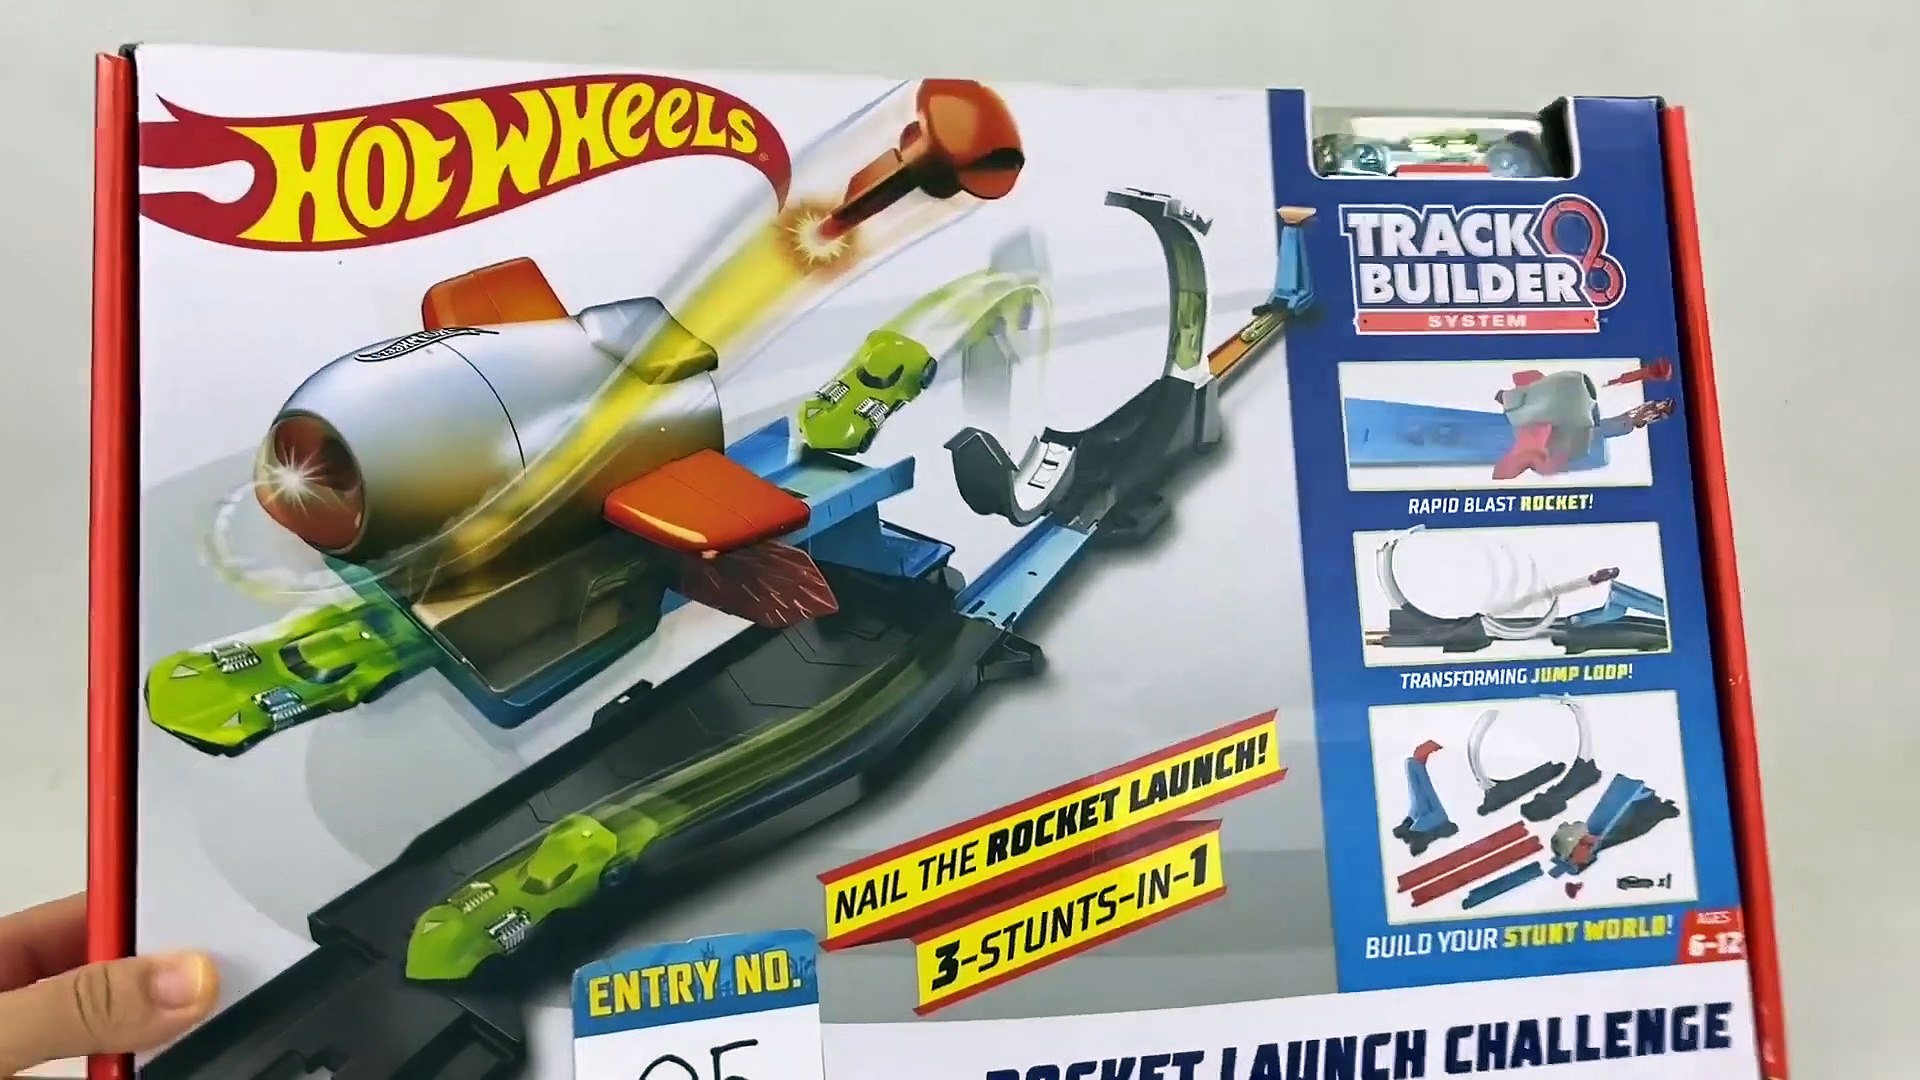 Hot Wheels Rocket Launch Challenge Track Builder System 3 Stunts in 1 Toy 